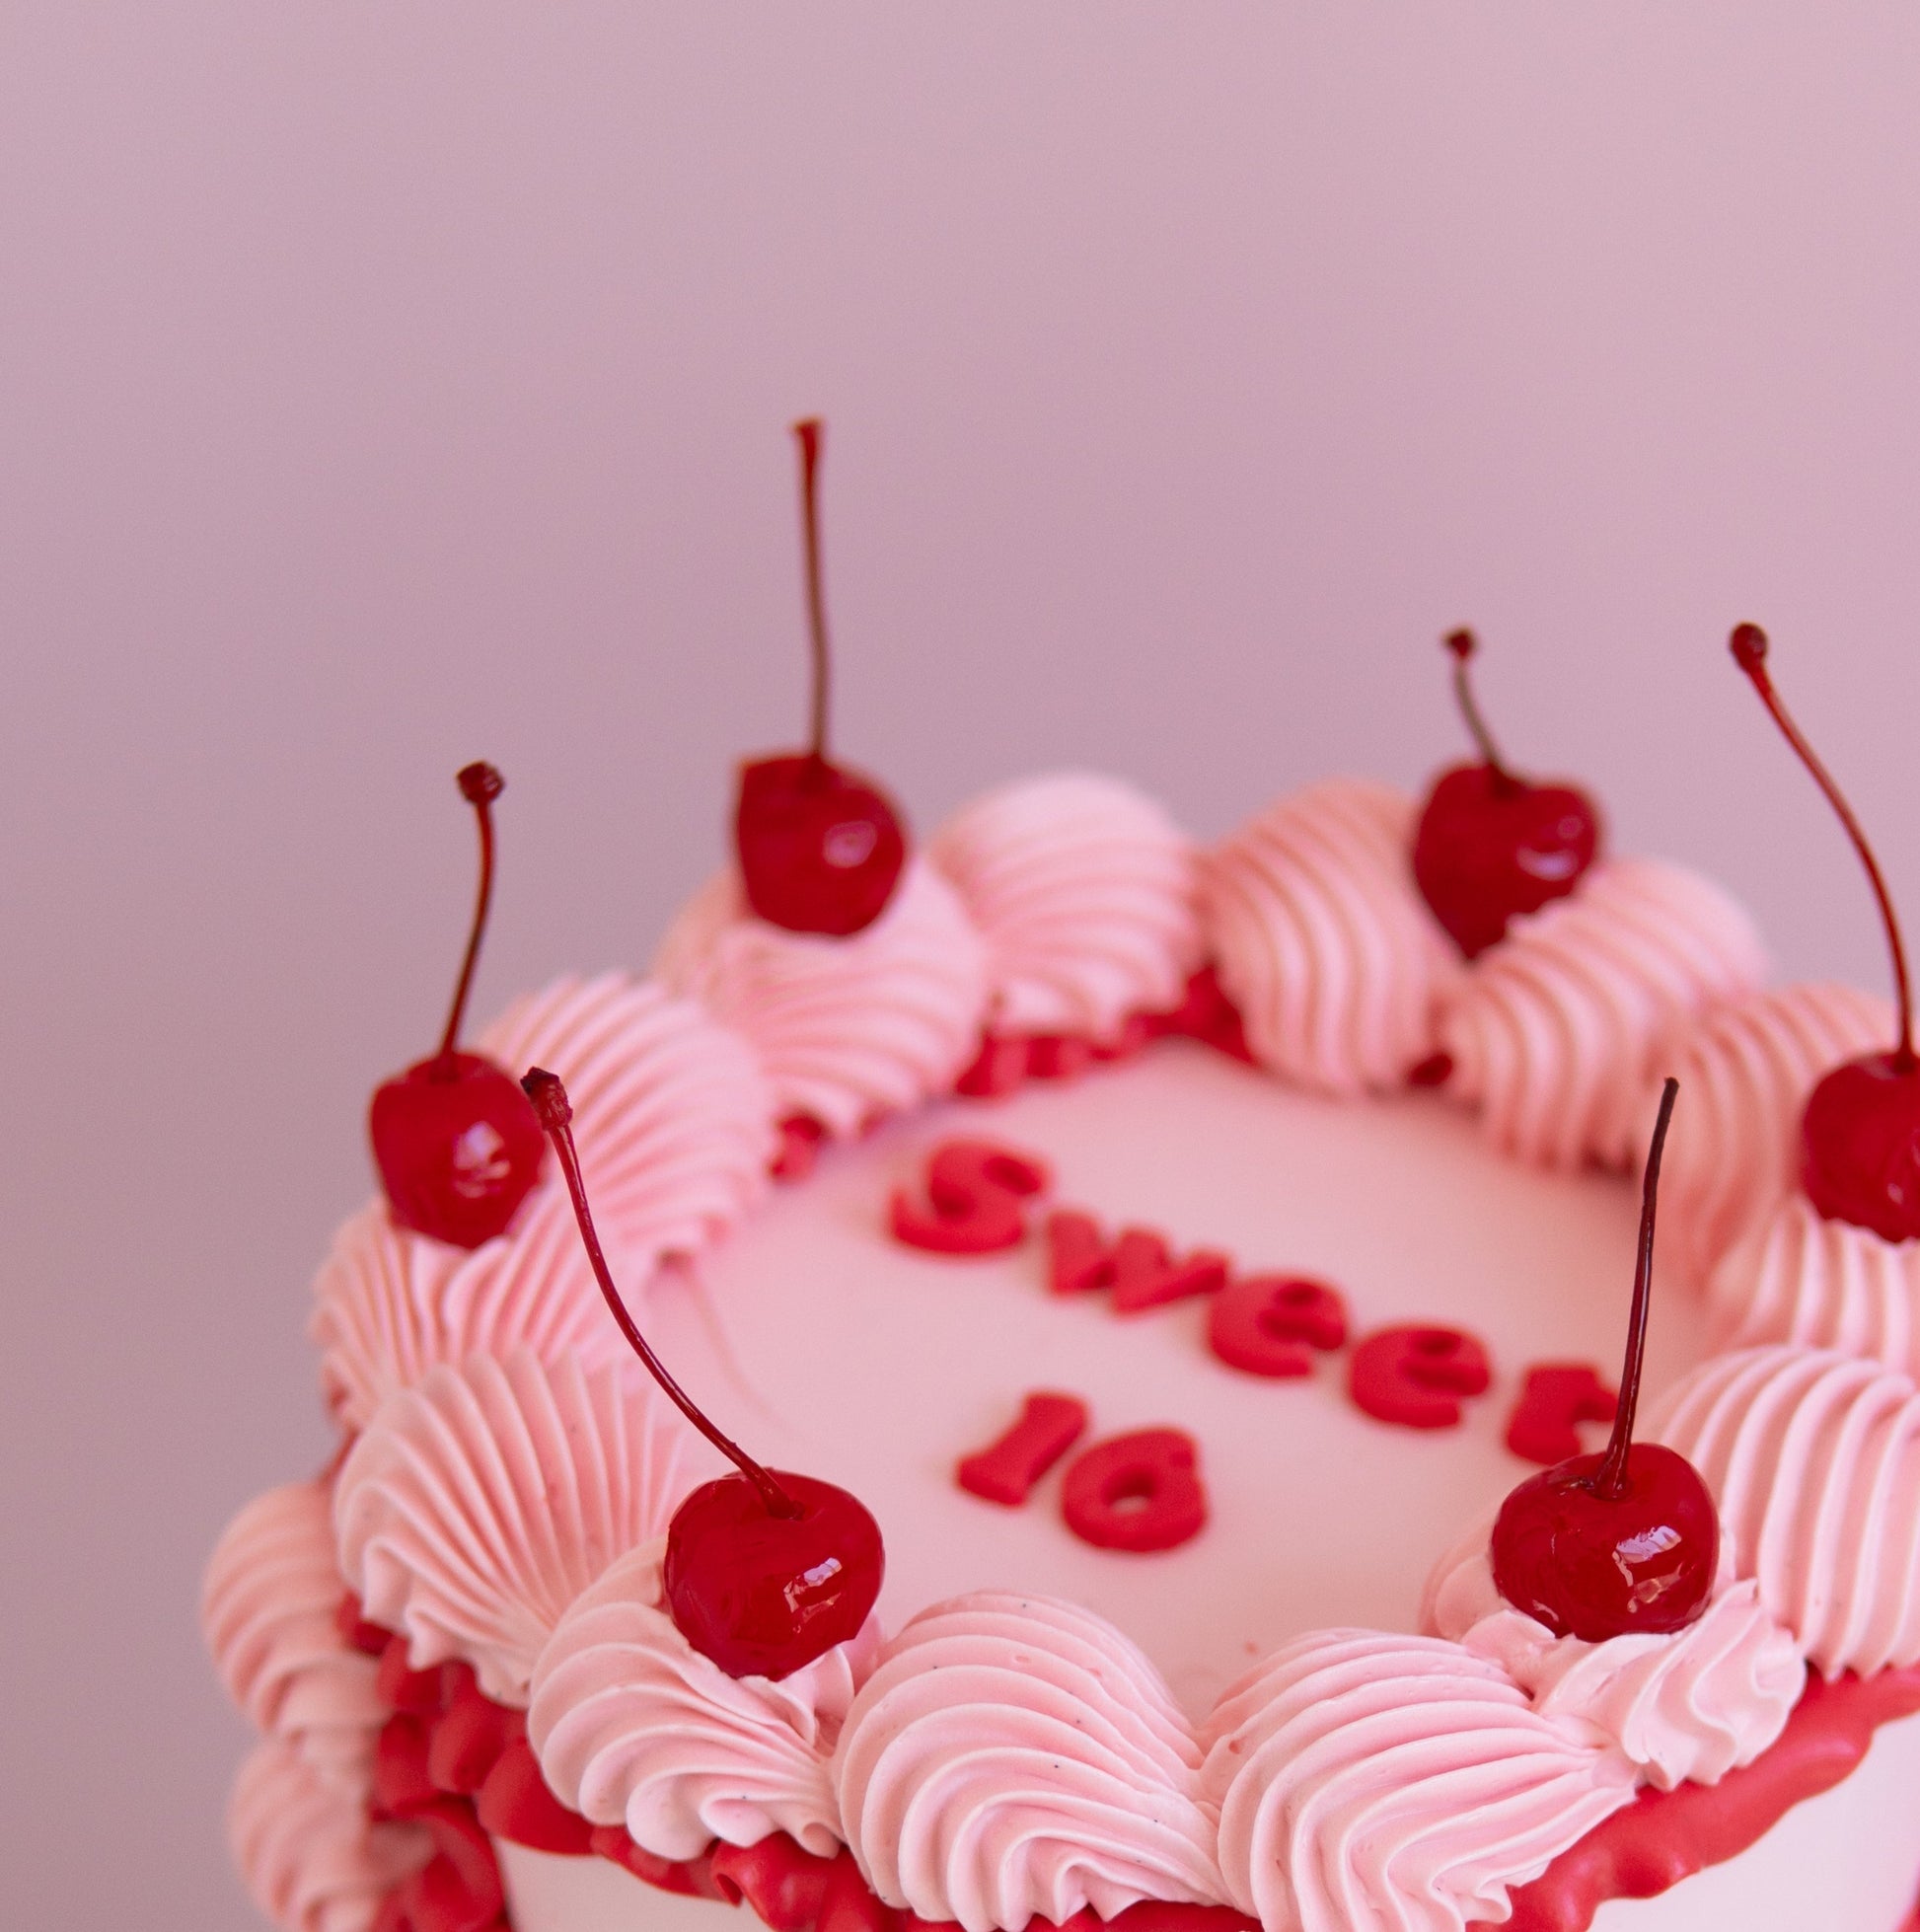 Red and pink Retro cake, with fun old school piping and juicy red cherries ontop